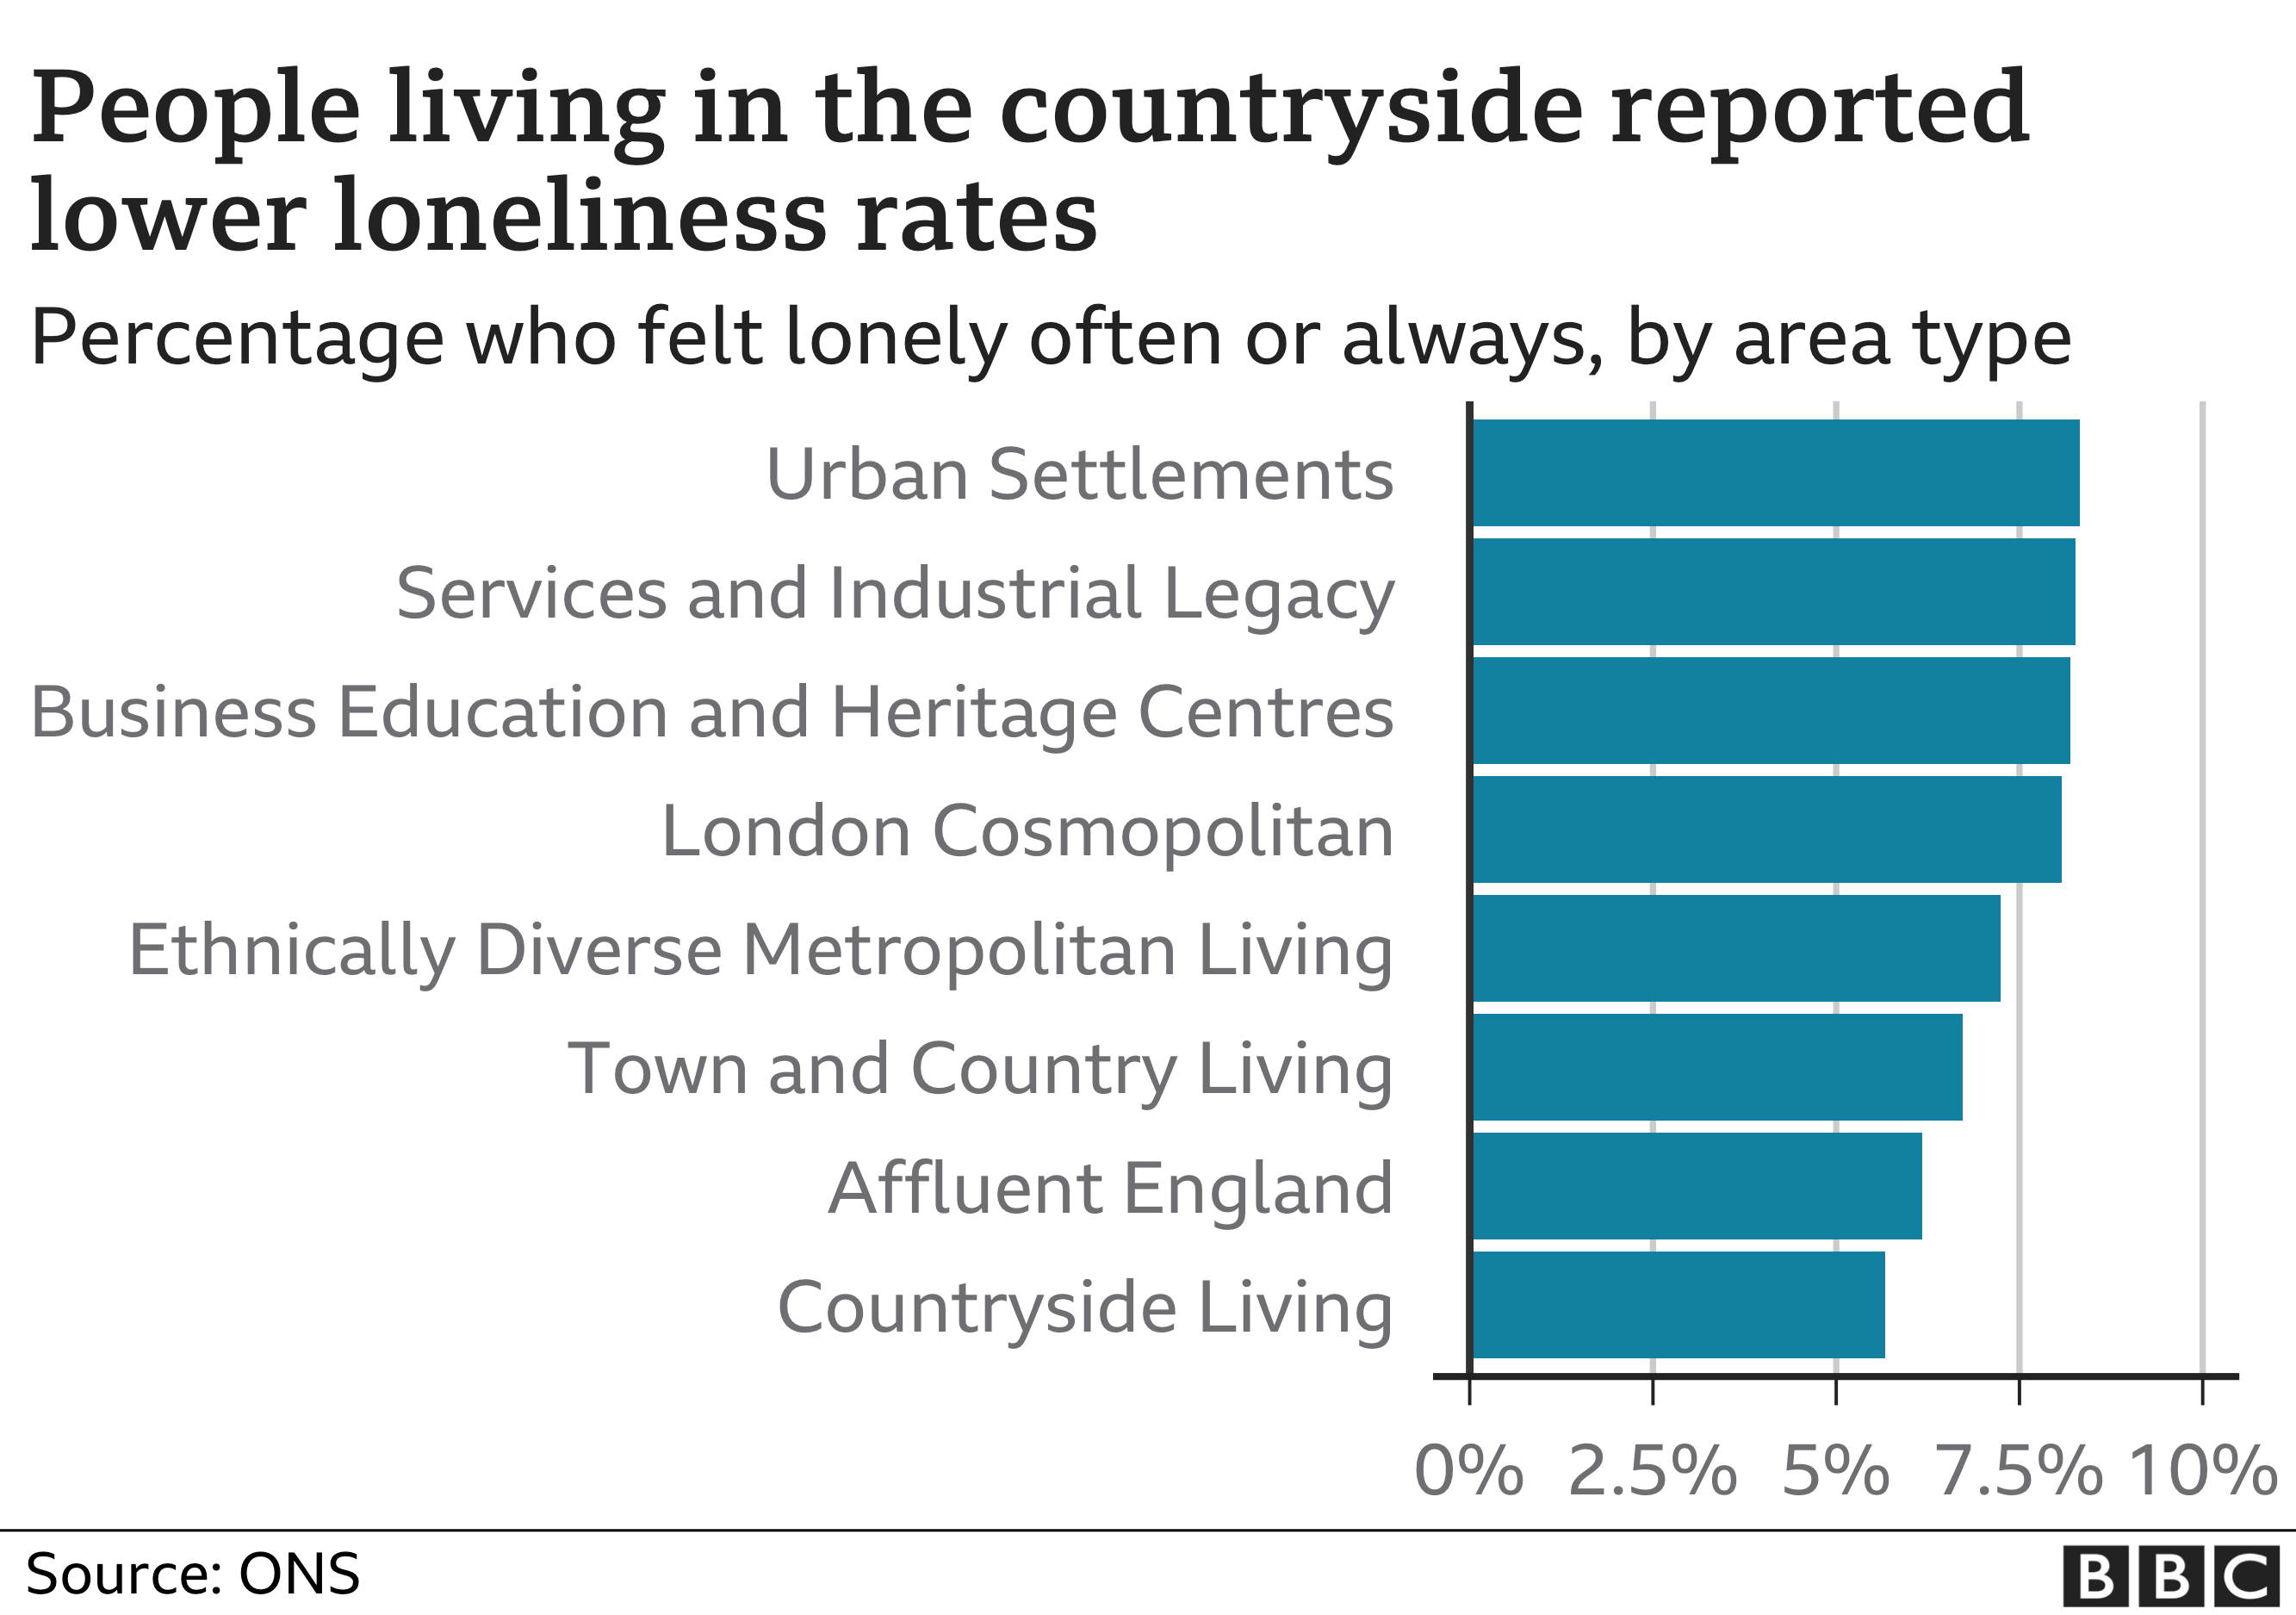 Chart shows people more likely to feel lonely in urban areas